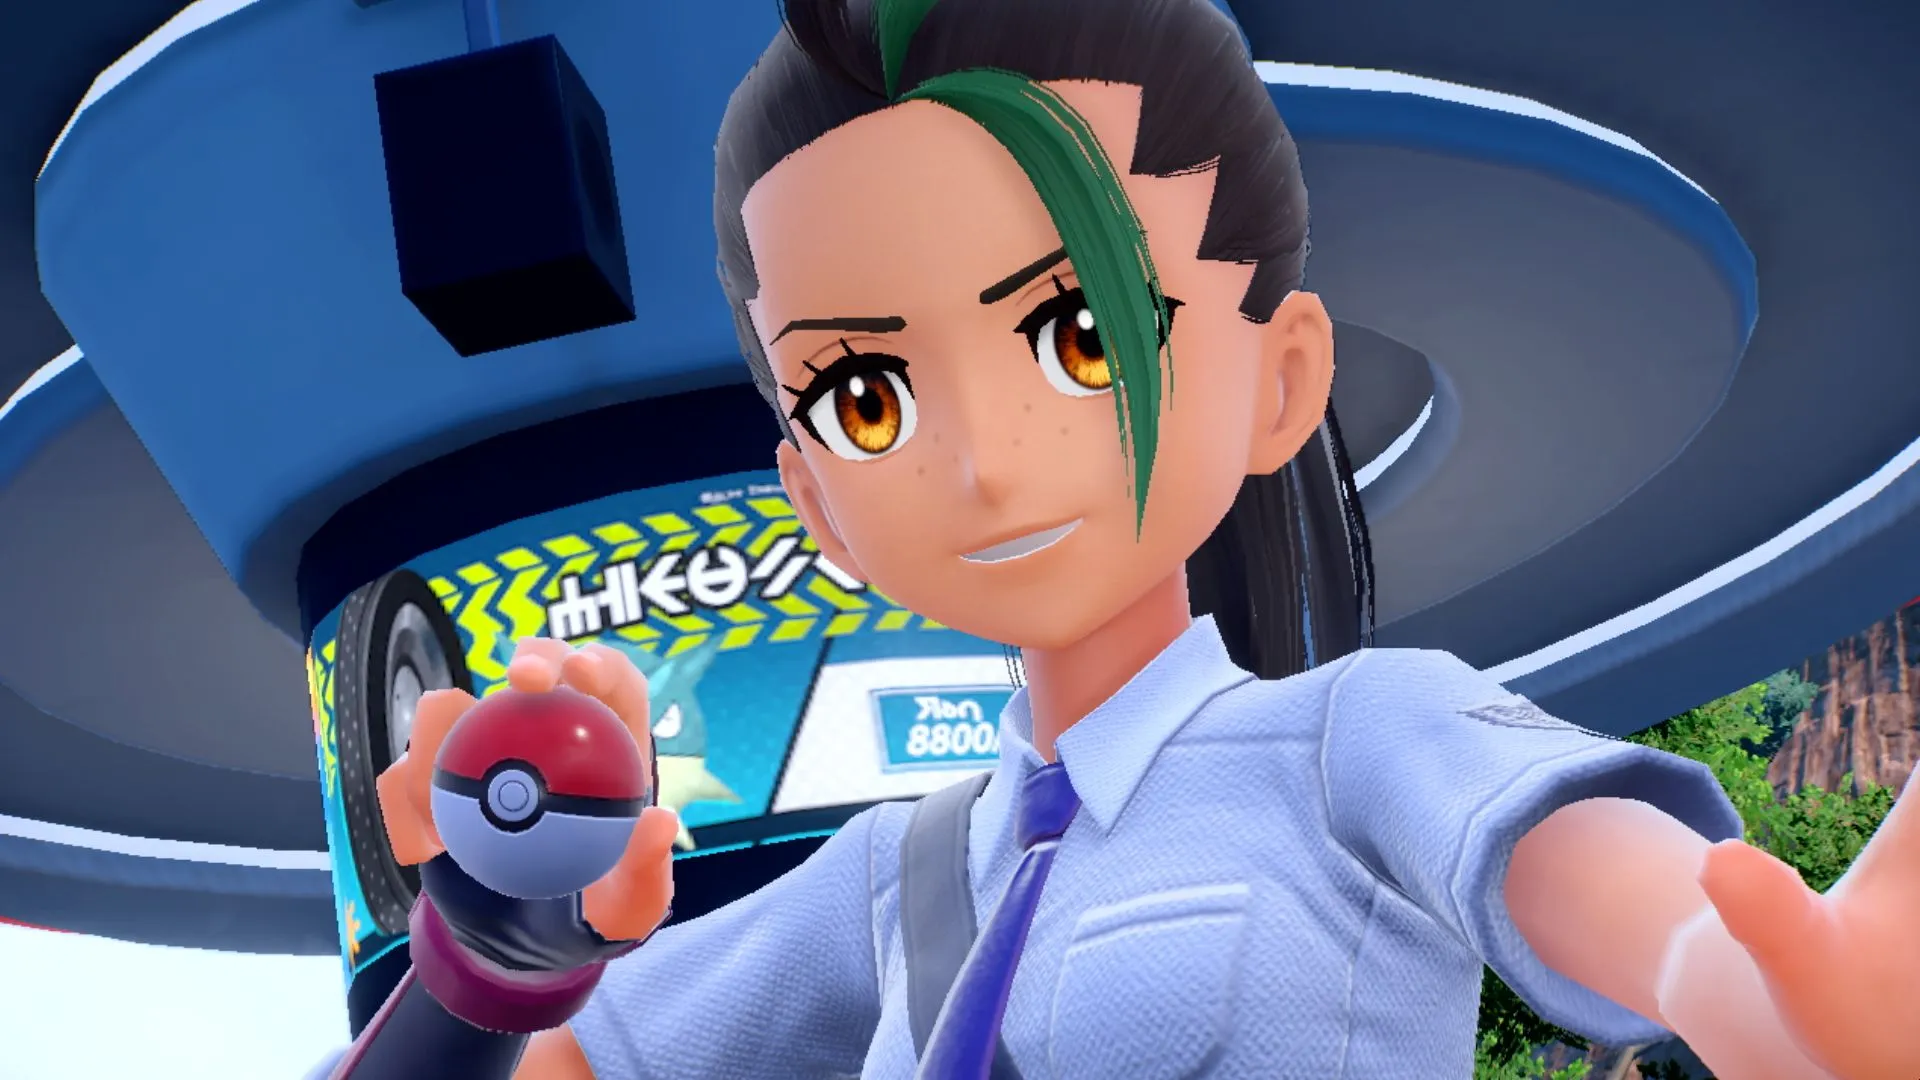 Pokemon Sword and Shield Gym Leaders Guide